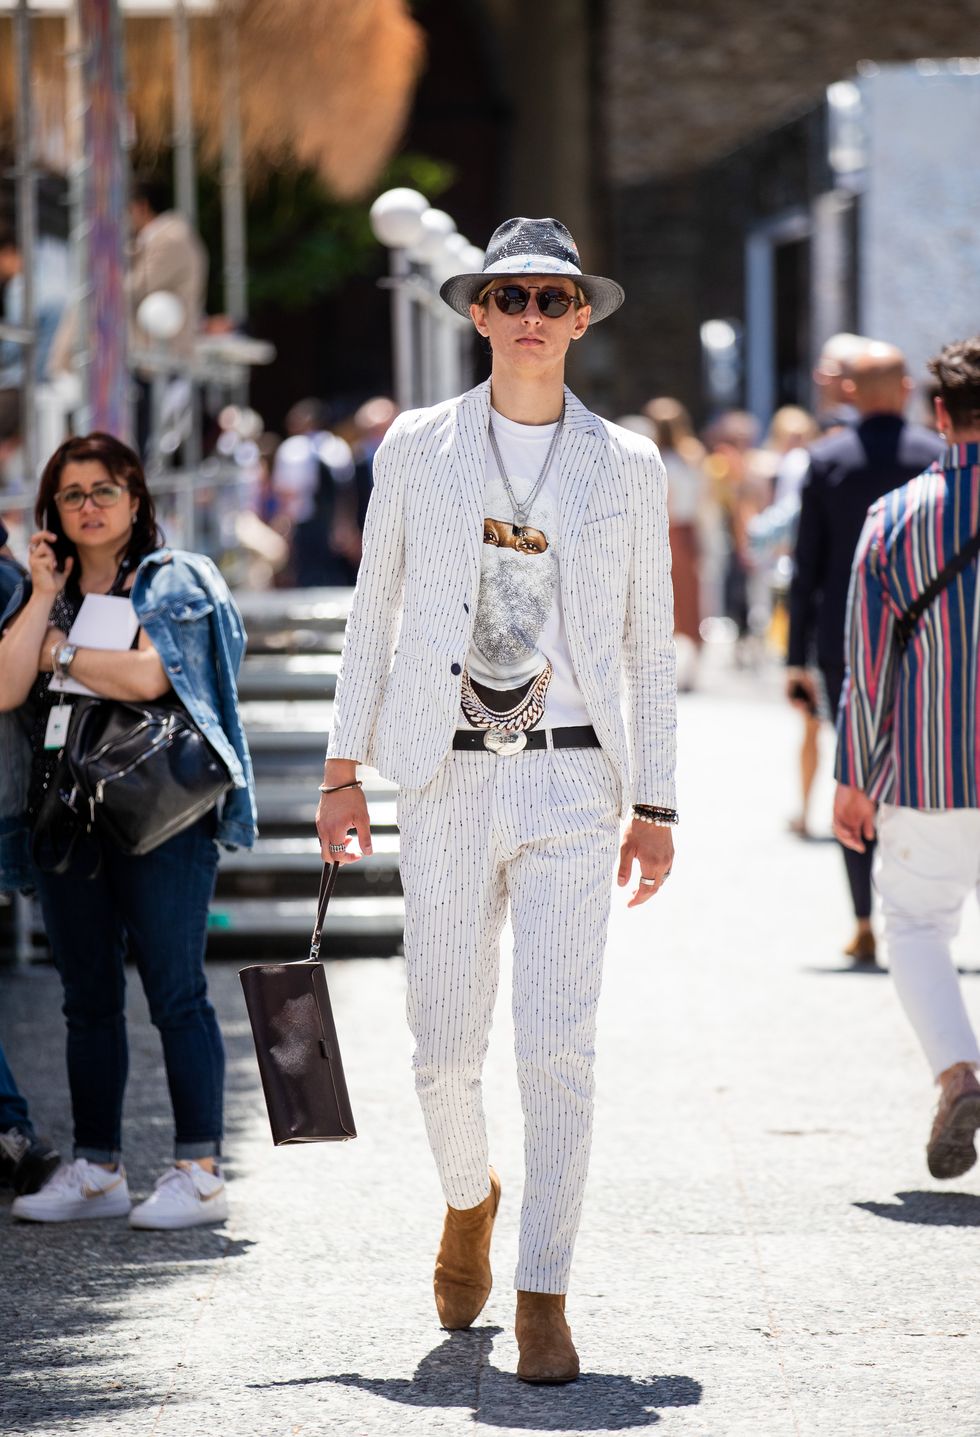 The Best Street Style Looks from Pitti Uomo 96